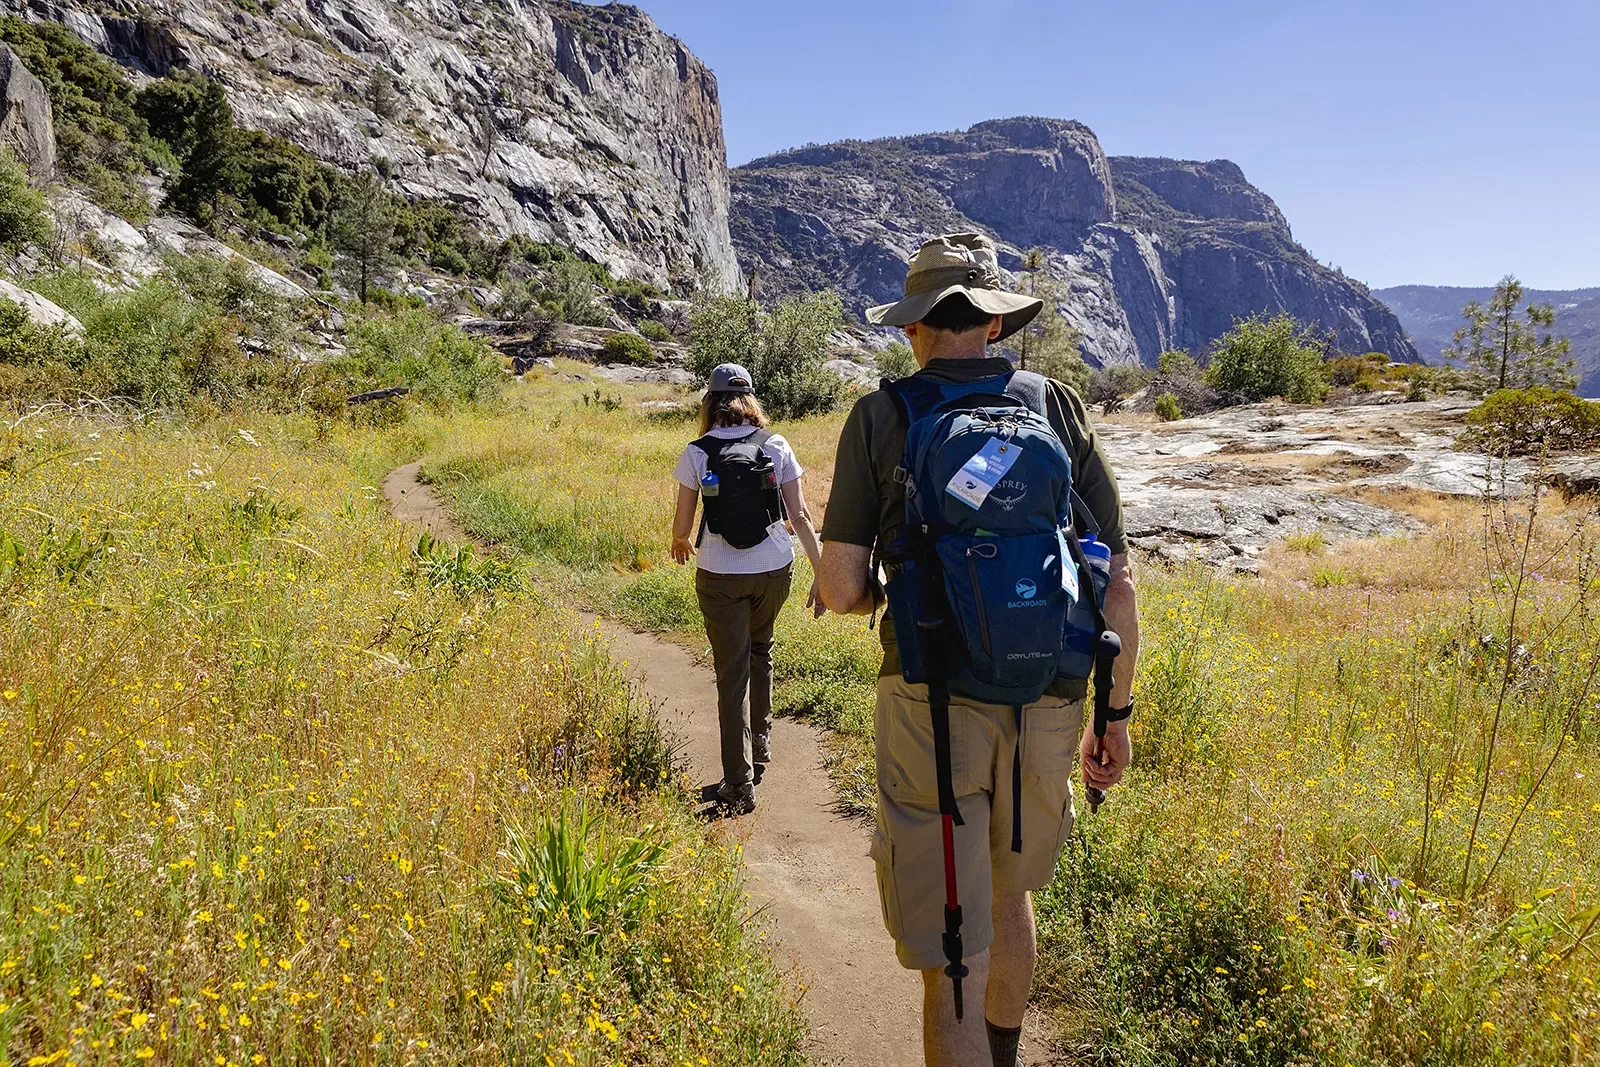 Two guests hiking on grassy trail, large cliffs to their left.